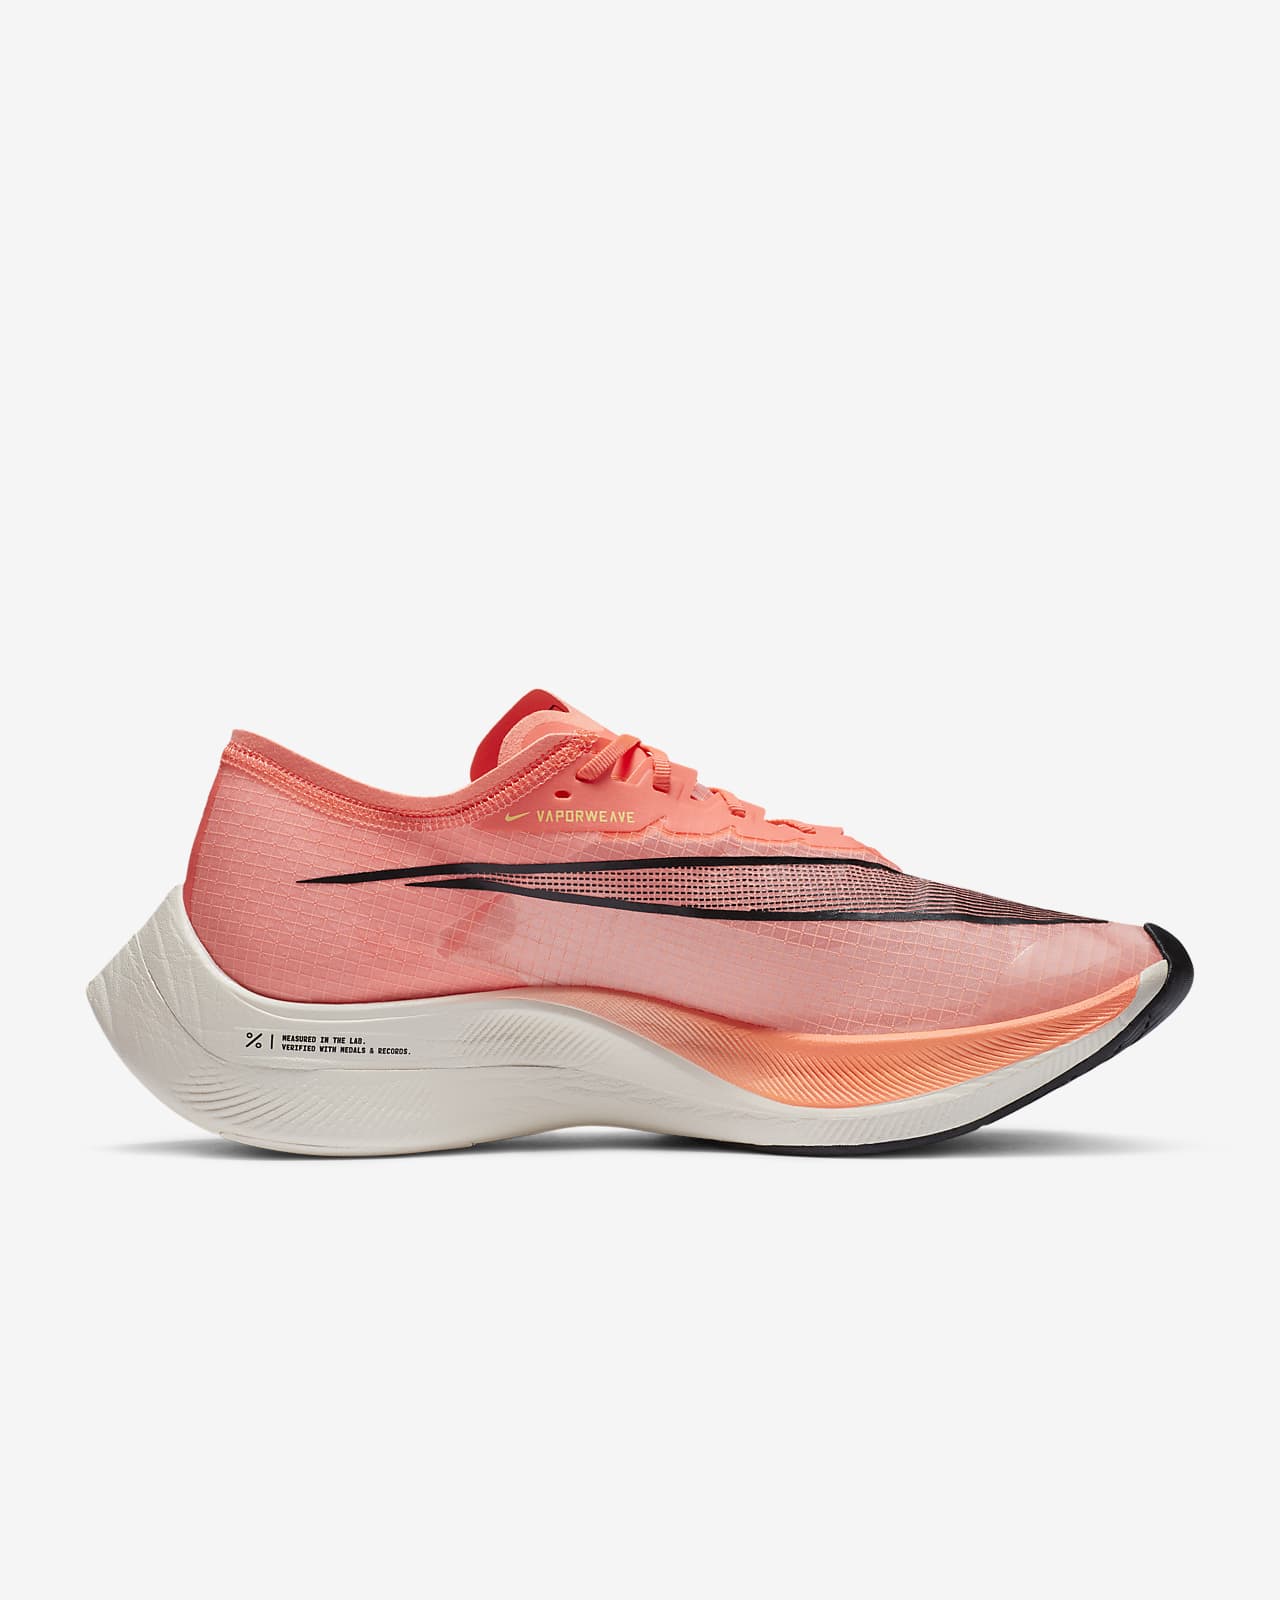 nike air zoomx vaporfly next